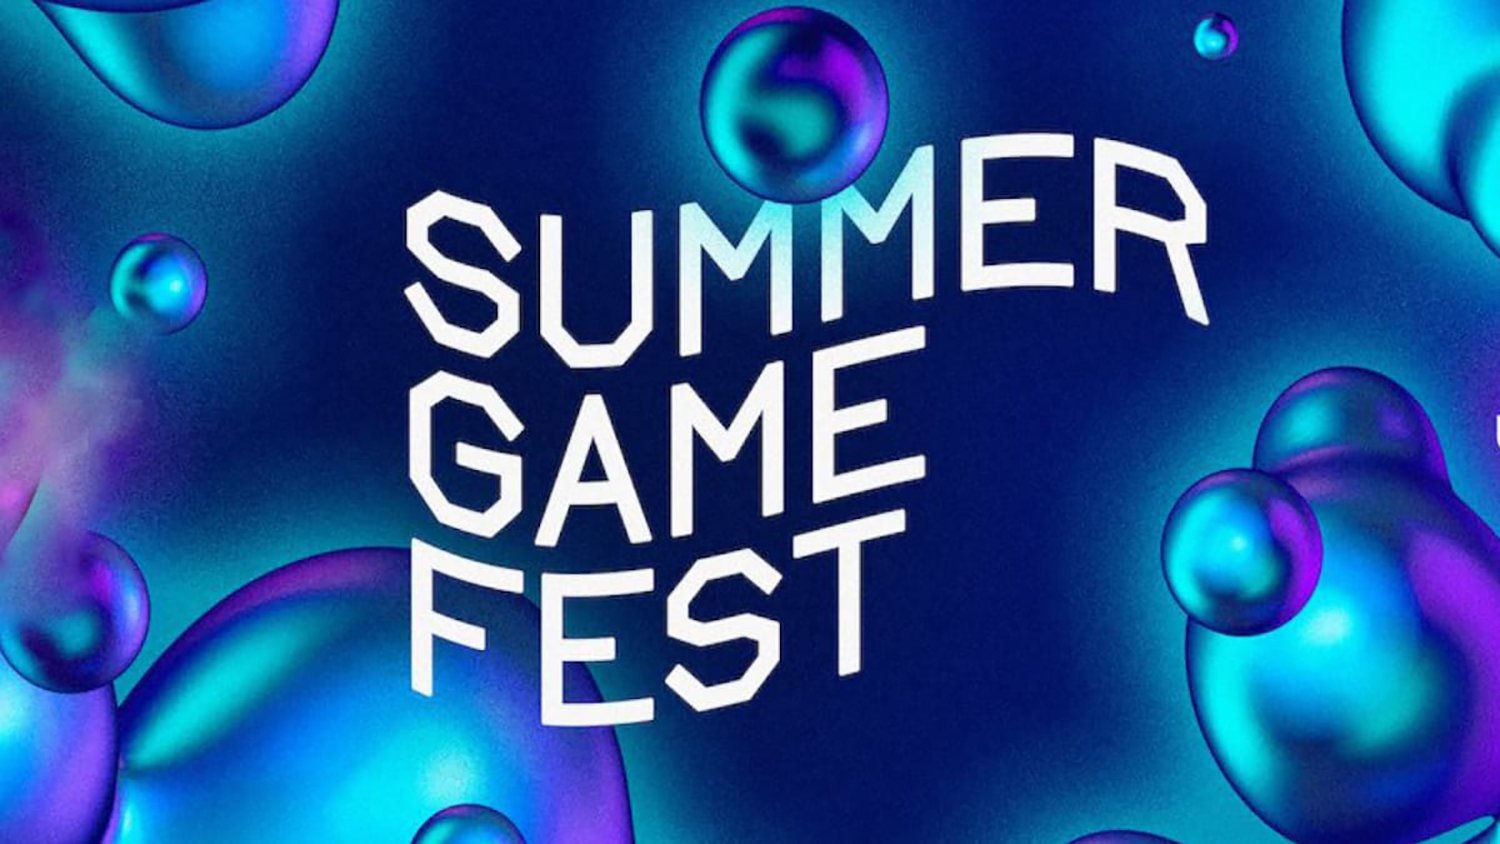 Summer Game Fest 2022 logo over a blue bubble background.